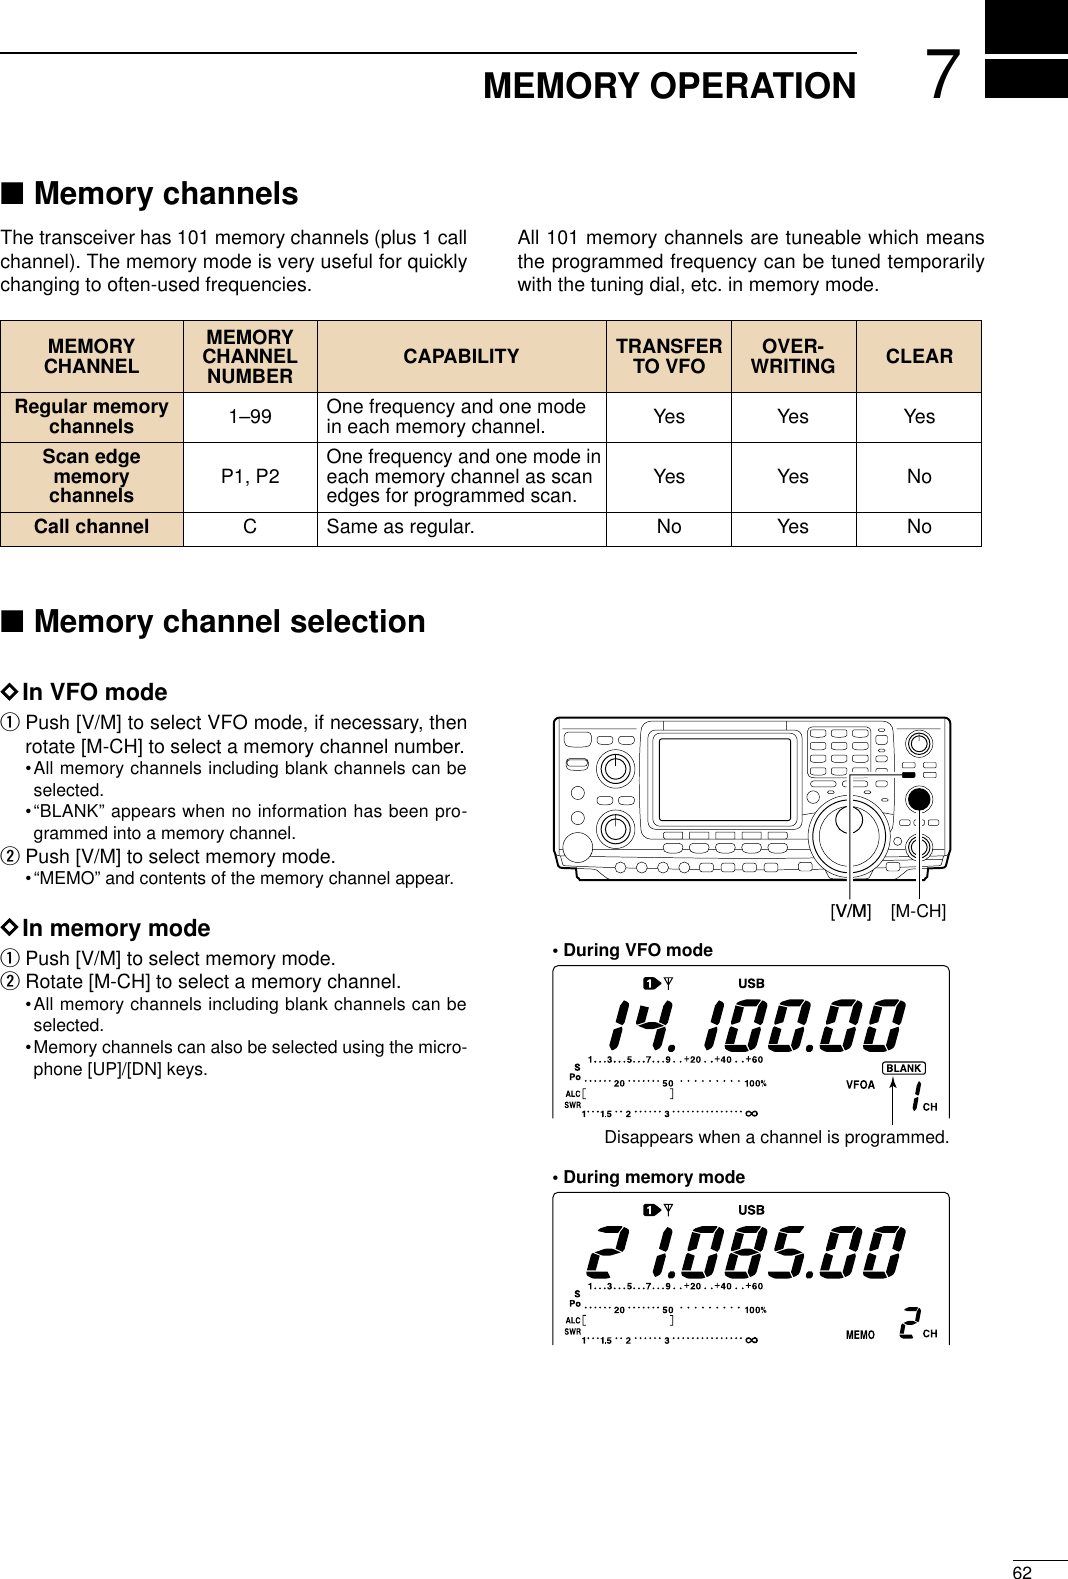 762MEMORY OPERATION■Memory channelsThe transceiver has 101 memory channels (plus 1 callchannel). The memory mode is very useful for quicklychanging to often-used frequencies.All 101 memory channels are tuneable which meansthe programmed frequency can be tuned temporarilywith the tuning dial, etc. in memory mode.■Memory channel selectionDIn VFO modeqPush [V/M] to select VFO mode, if necessary, thenrotate [M-CH] to select a memory channel number.•All memory channels including blank channels can beselected.•“BLANK” appears when no information has been pro-grammed into a memory channel.wPush [V/M] to select memory mode.•“MEMO” and contents of the memory channel appear.DIn memory modeqPush [V/M] to select memory mode.wRotate [M-CH] to select a memory channel.•All memory channels including blank channels can beselected.•Memory channels can also be selected using the micro-phone [UP]/[DN] keys.[V/M][M-CH]Disappears when a channel is programmed.• During VFO mode• During memory modeMEMORY MEMORY TRANSFER OVER-CHANNEL CHANNEL CAPABILITY TO VFO WRITING CLEARNUMBERRegular memory 1–99 One frequency and one mode  Yes Yes Yeschannels in each memory channel.Scan edgeOne frequency and one mode inmemory P1, P2 each memory channel as scan Yes Yes Nochannels edges for programmed scan.Call channel C Same as regular. No Yes No